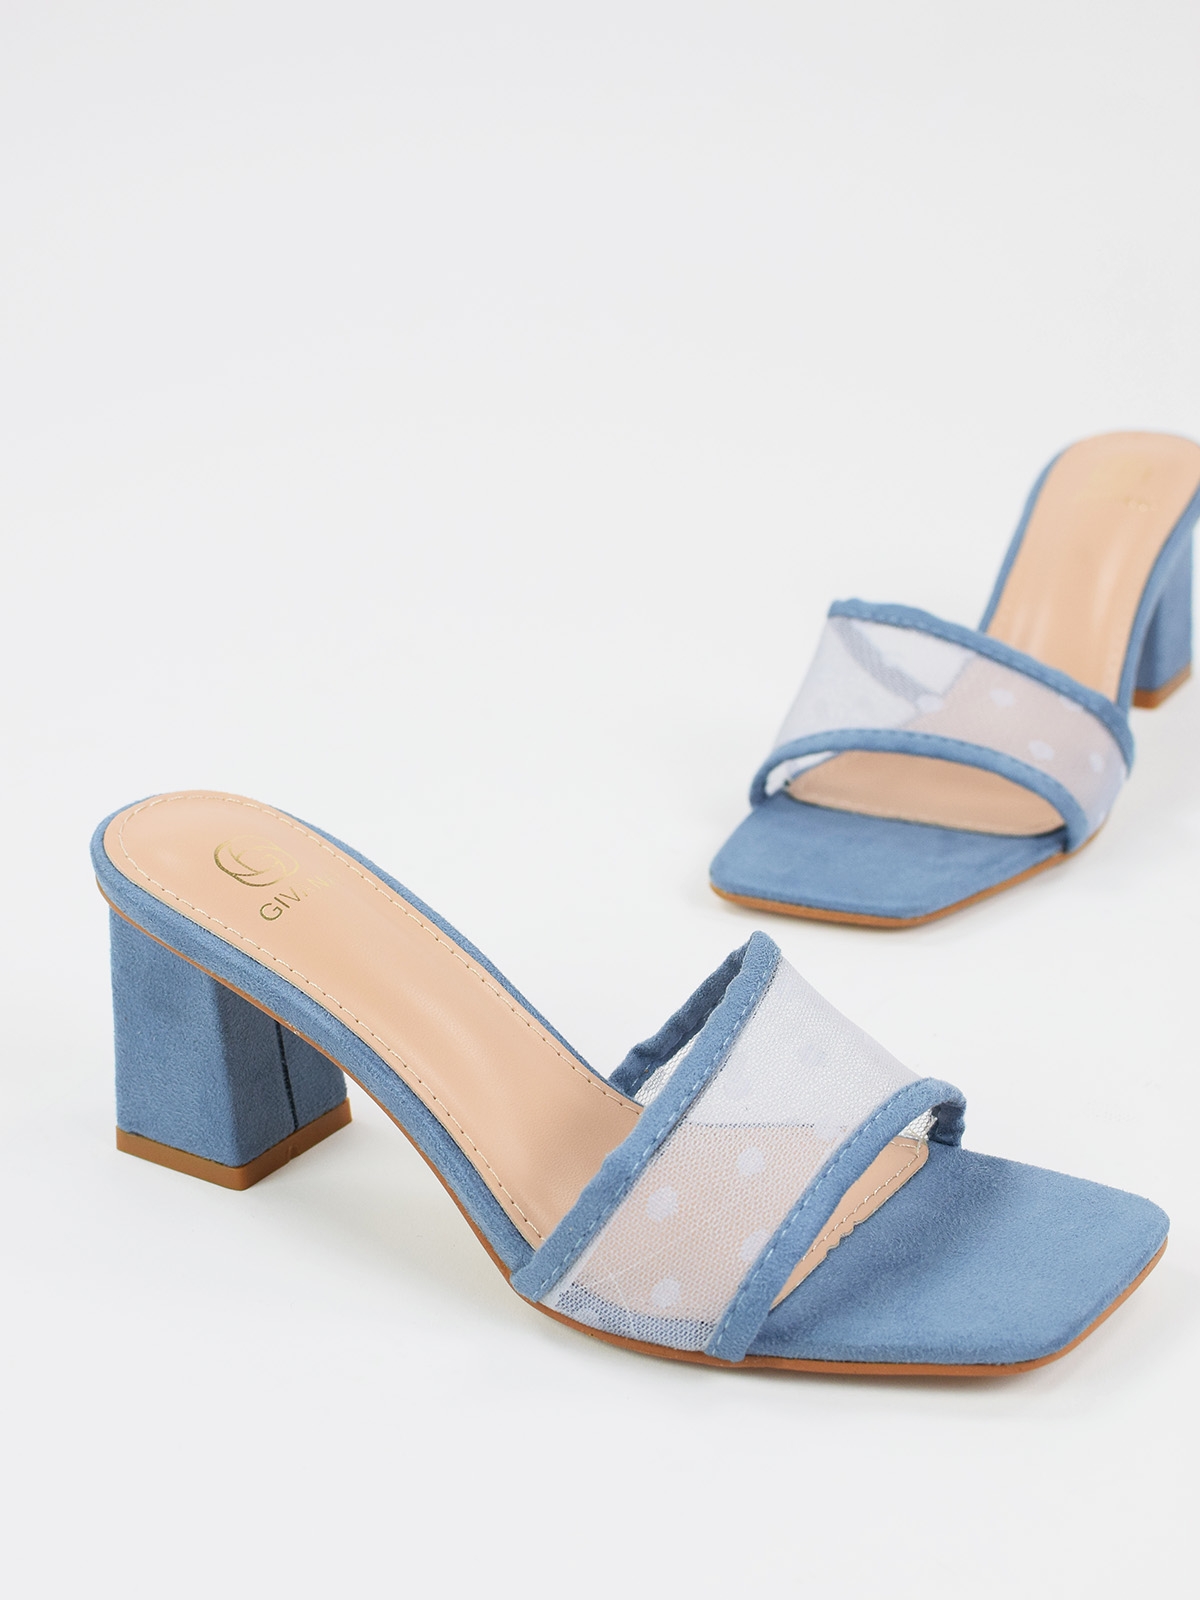 Mule sandals with mid fat heel in blue